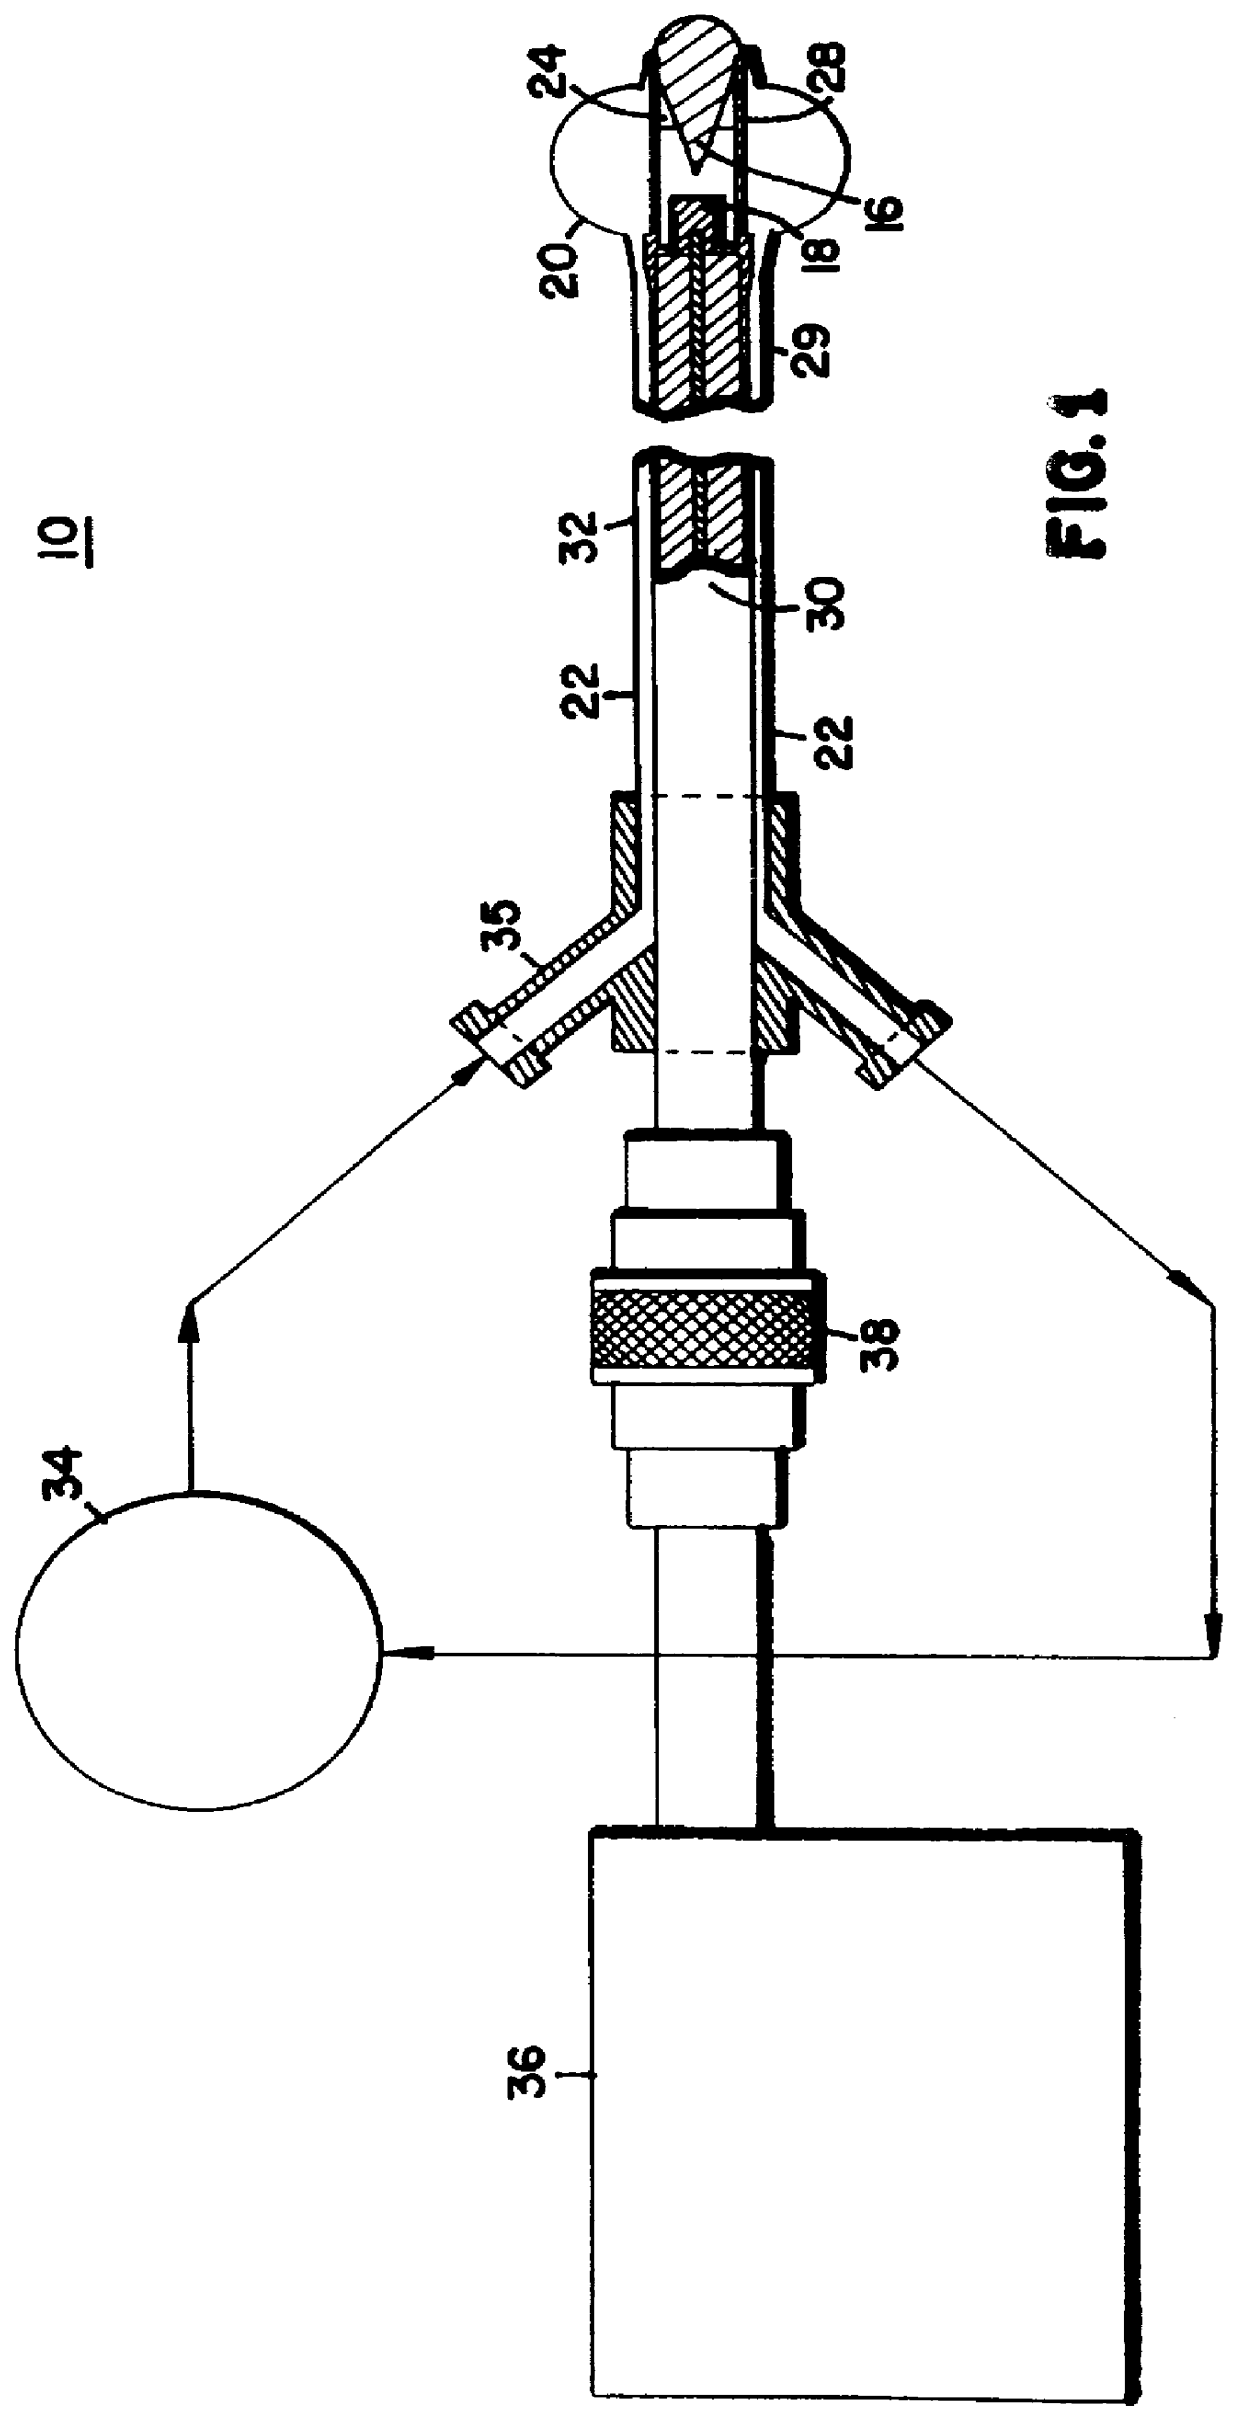 X-ray device having a dilation structure for delivering localized radiation to an interior of a body